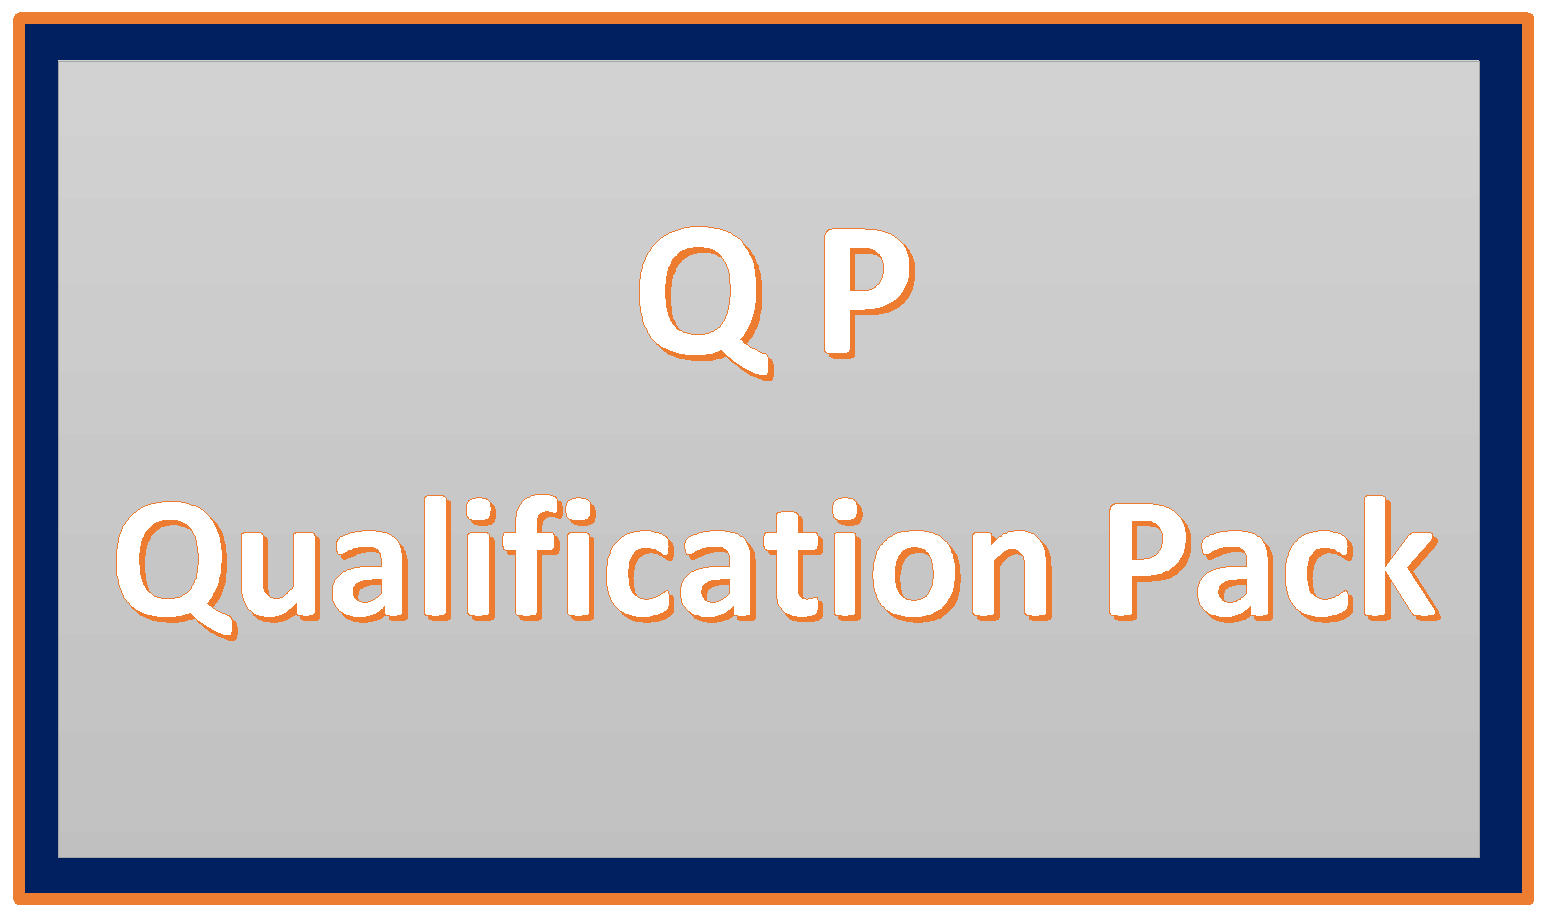 http://study.aisectonline.com/images/CCE Qualification Pack.png